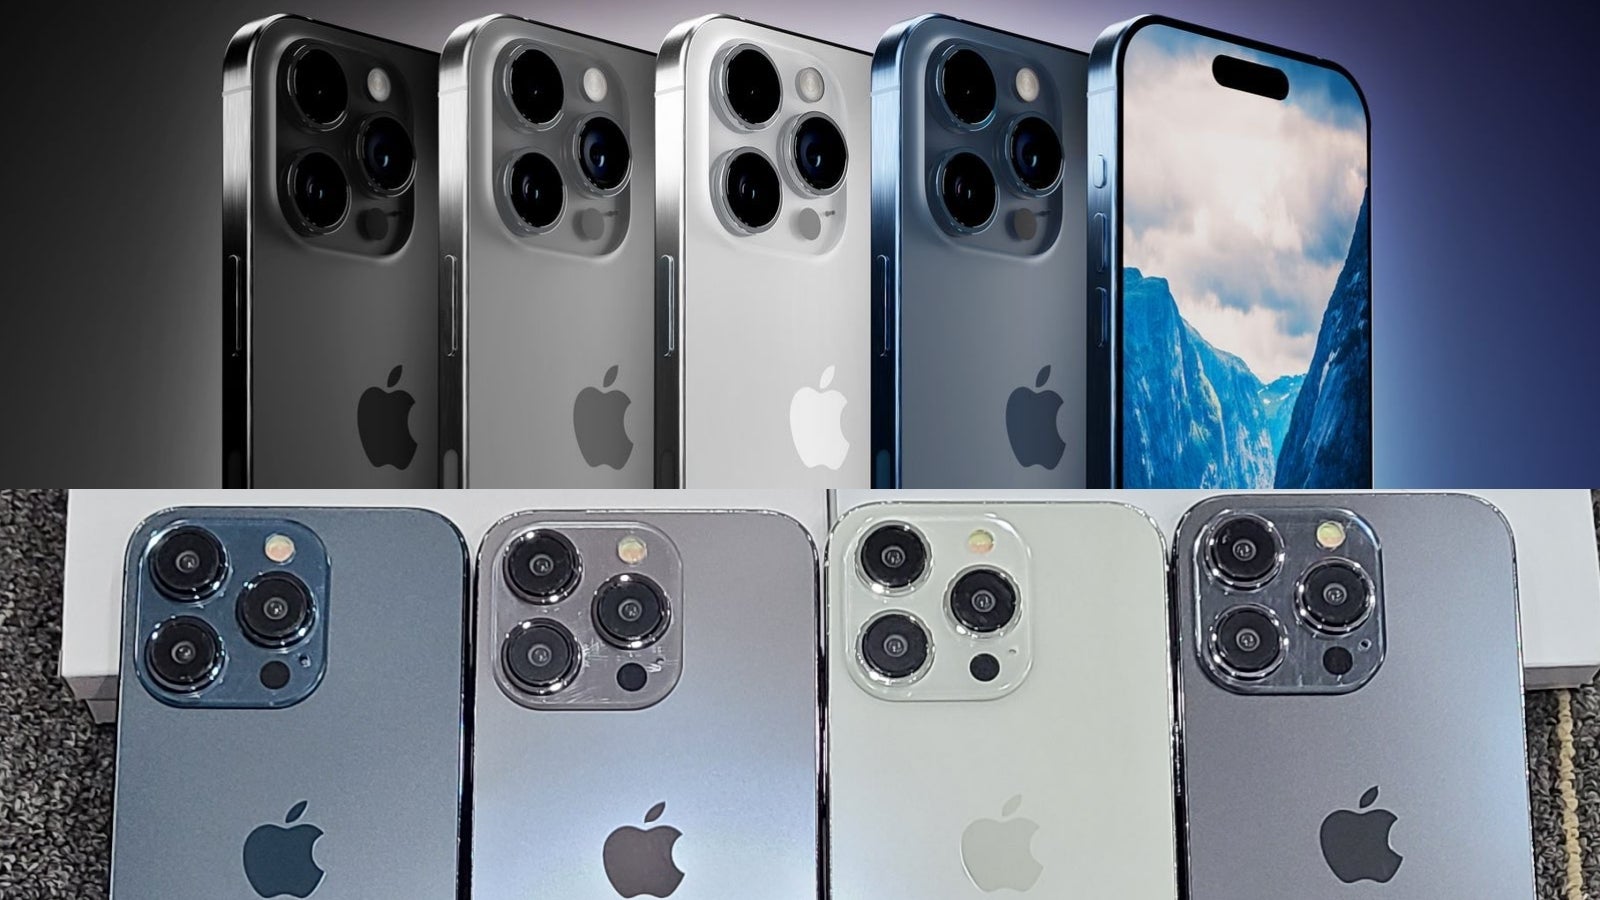 The boring looking iPhone 15 and iPhone 15 Pro: Apple doesn’t see color (and that’s the problem)